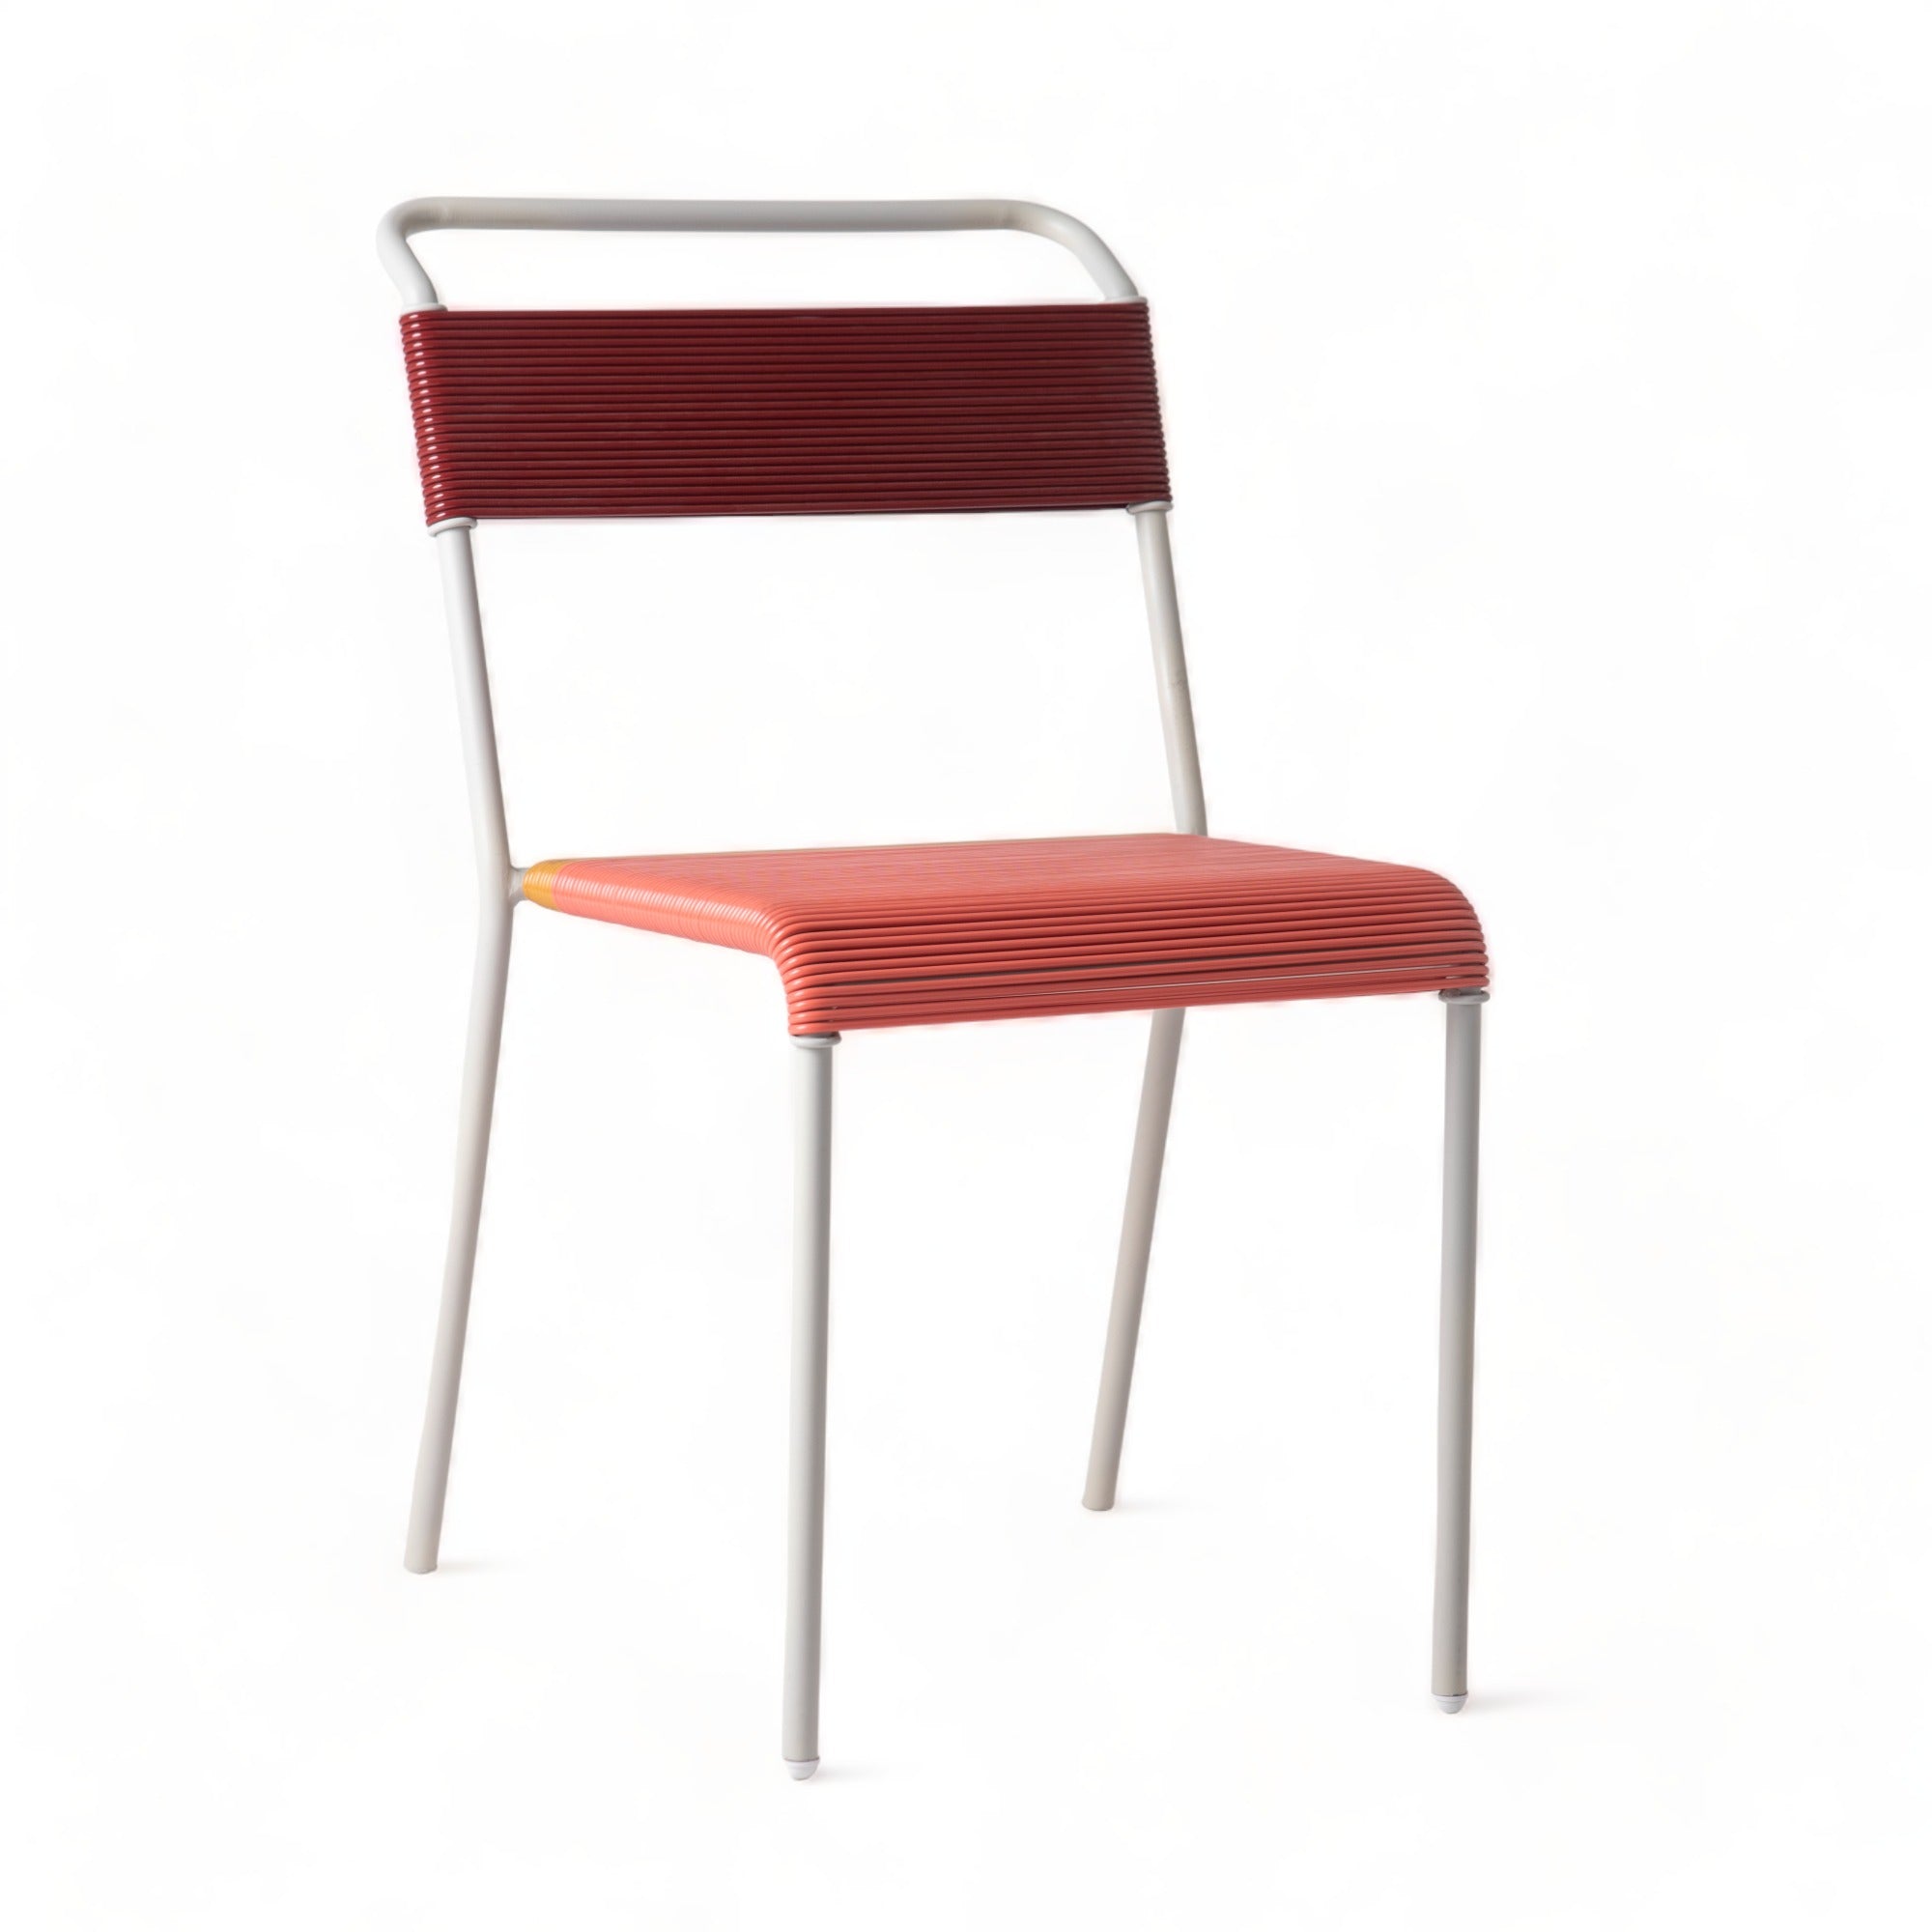 Terracotta Colorin Dining Chair